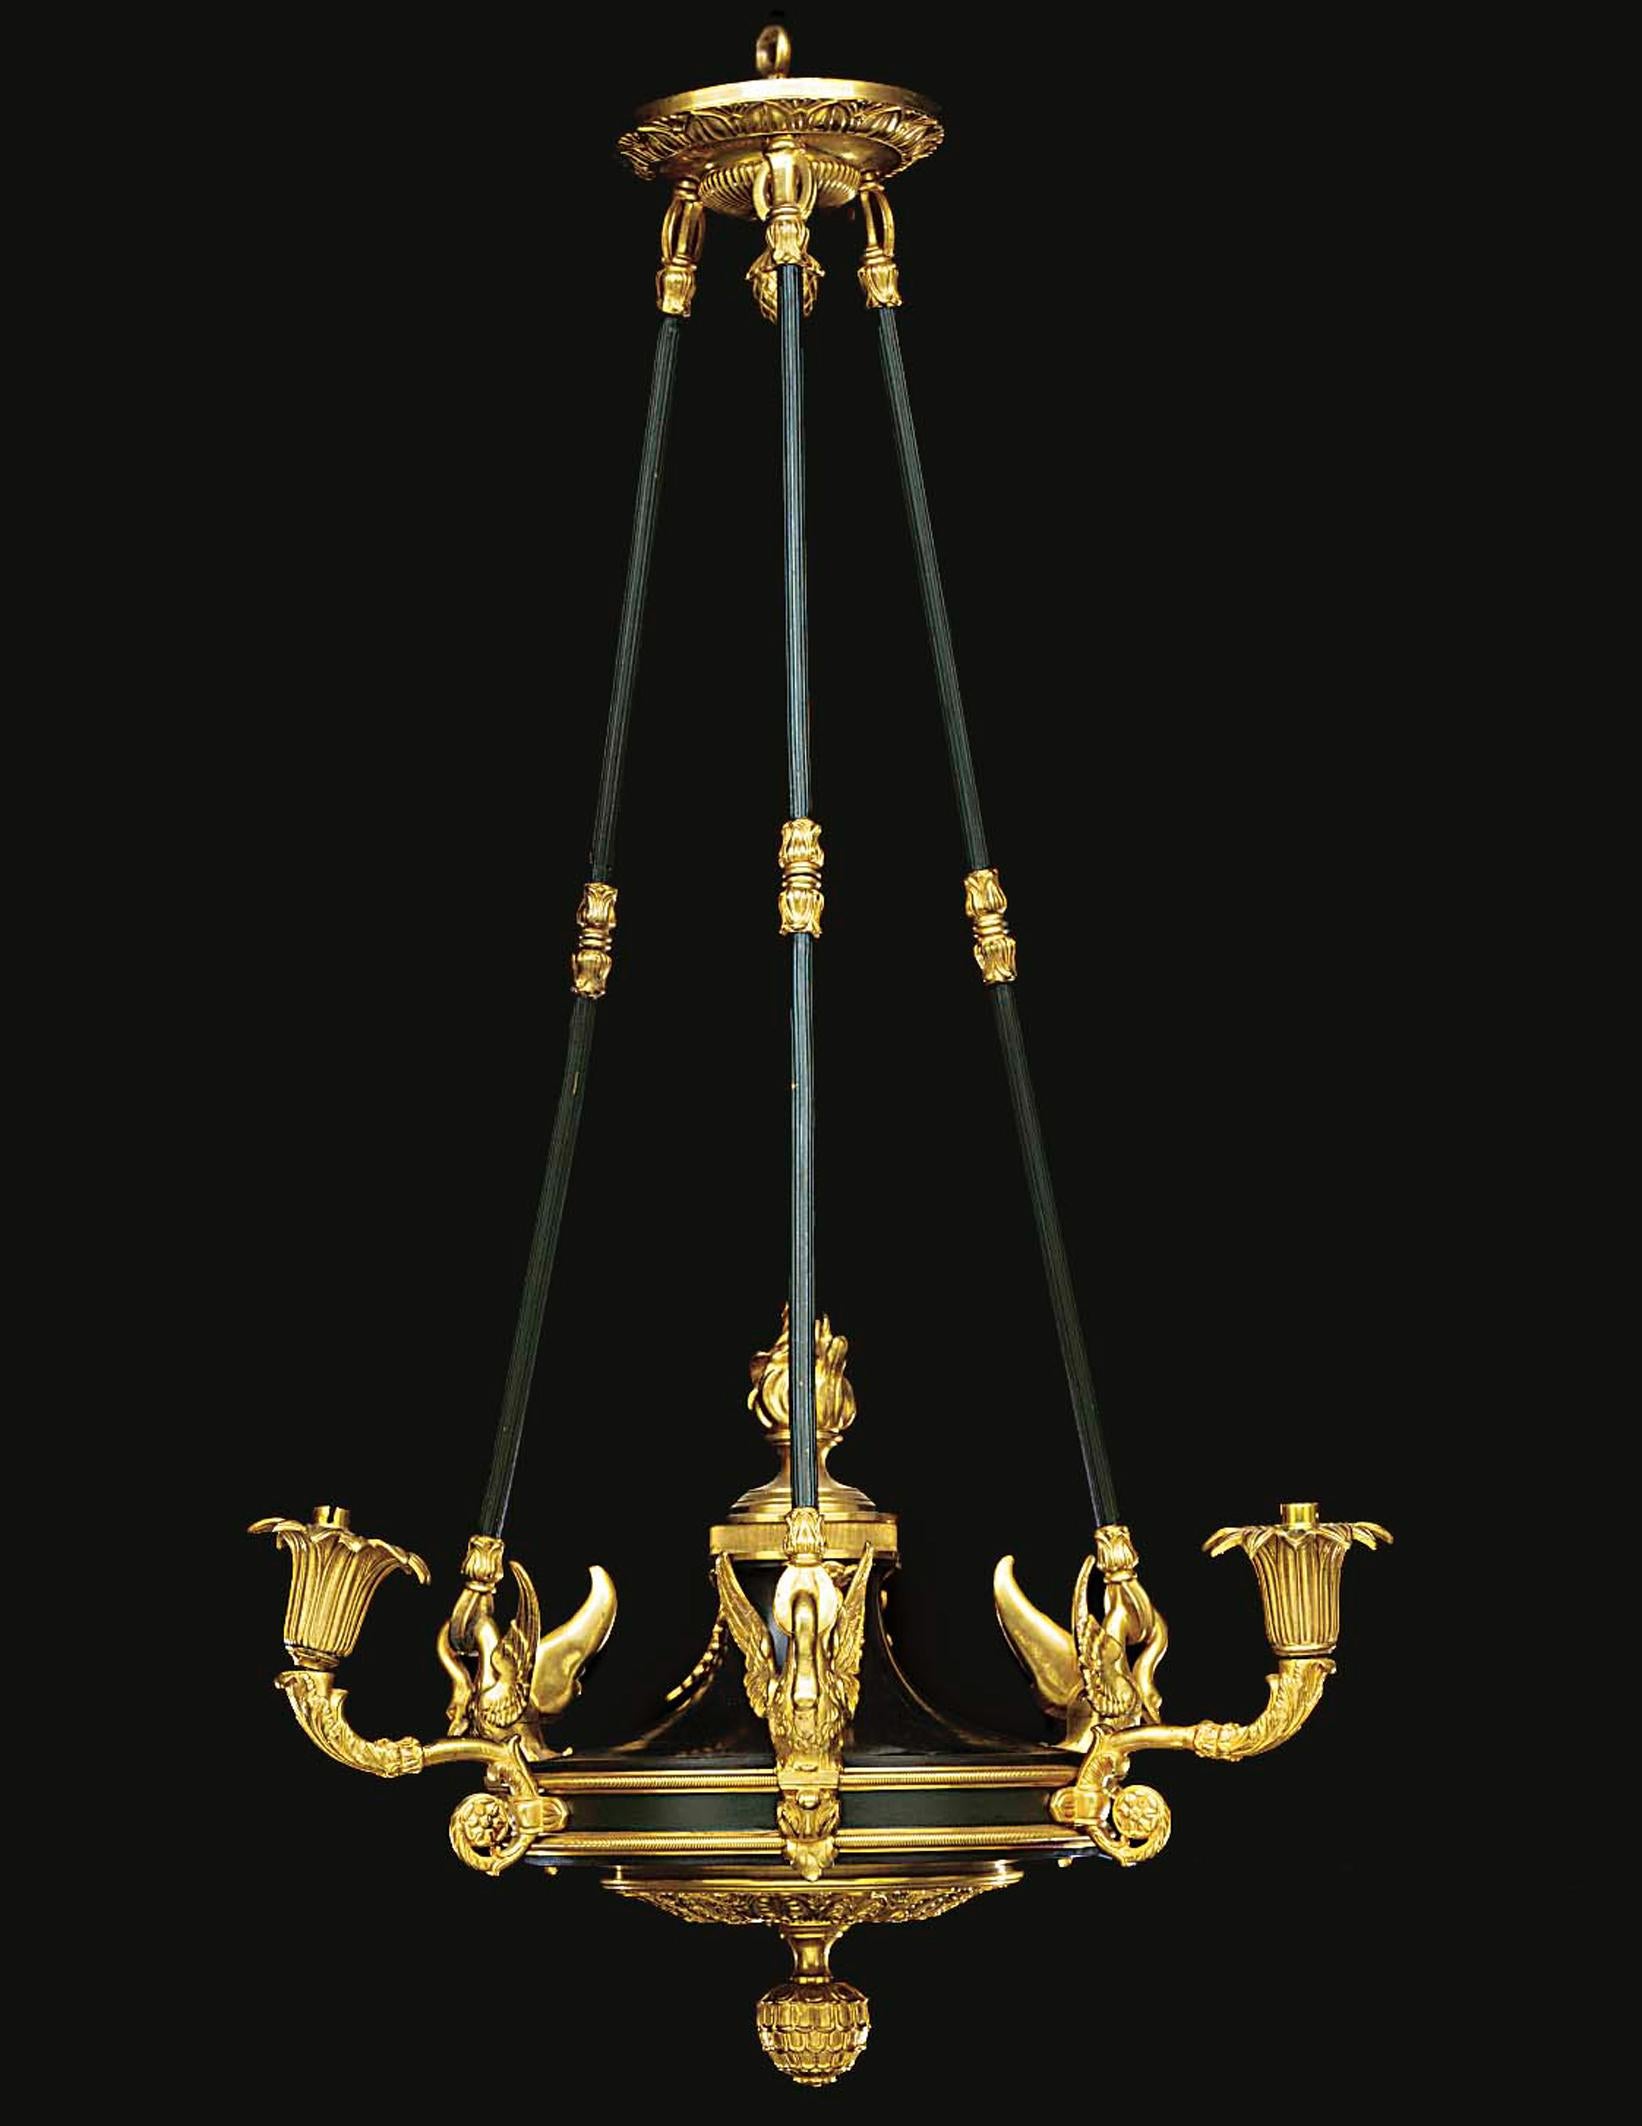 A fine Empire style gilt and patinated bronze three-light chandelier, with a circular corona cast with stiff leaves and a pine cone boss above reeded suspension rods with swan terminals and a flame finial.

French, circa 1900.